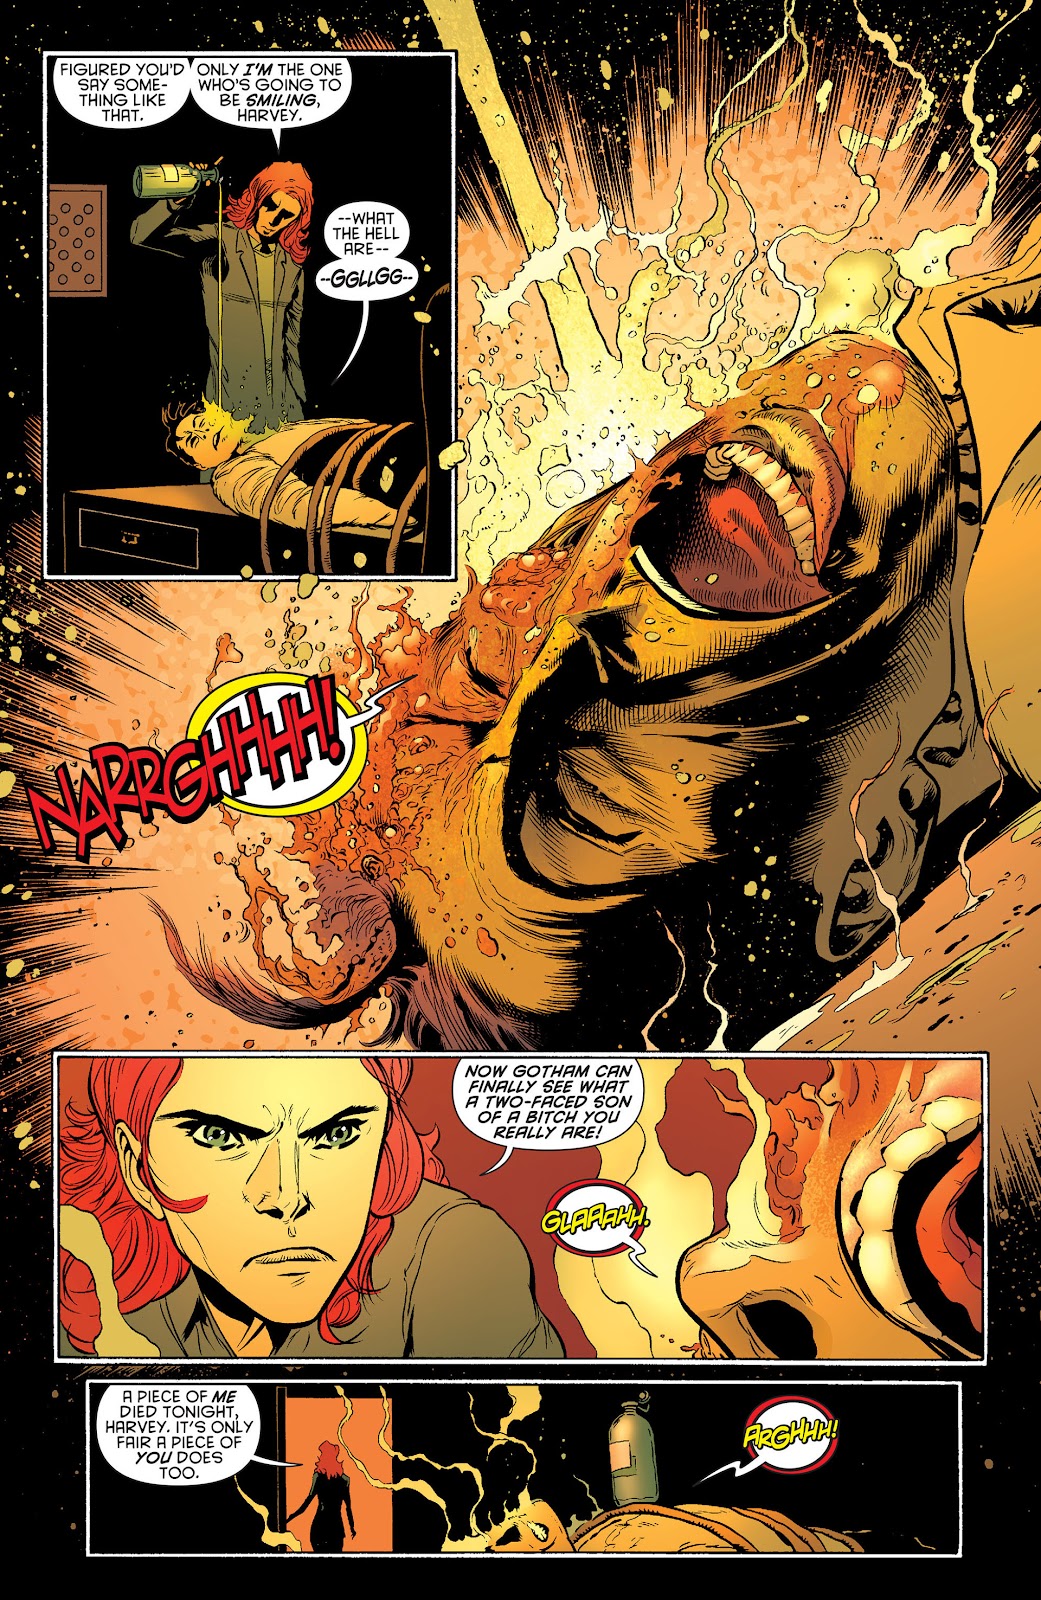 Batman and Robin (2011) issue 24 - Batman and Two-Face - Page 17